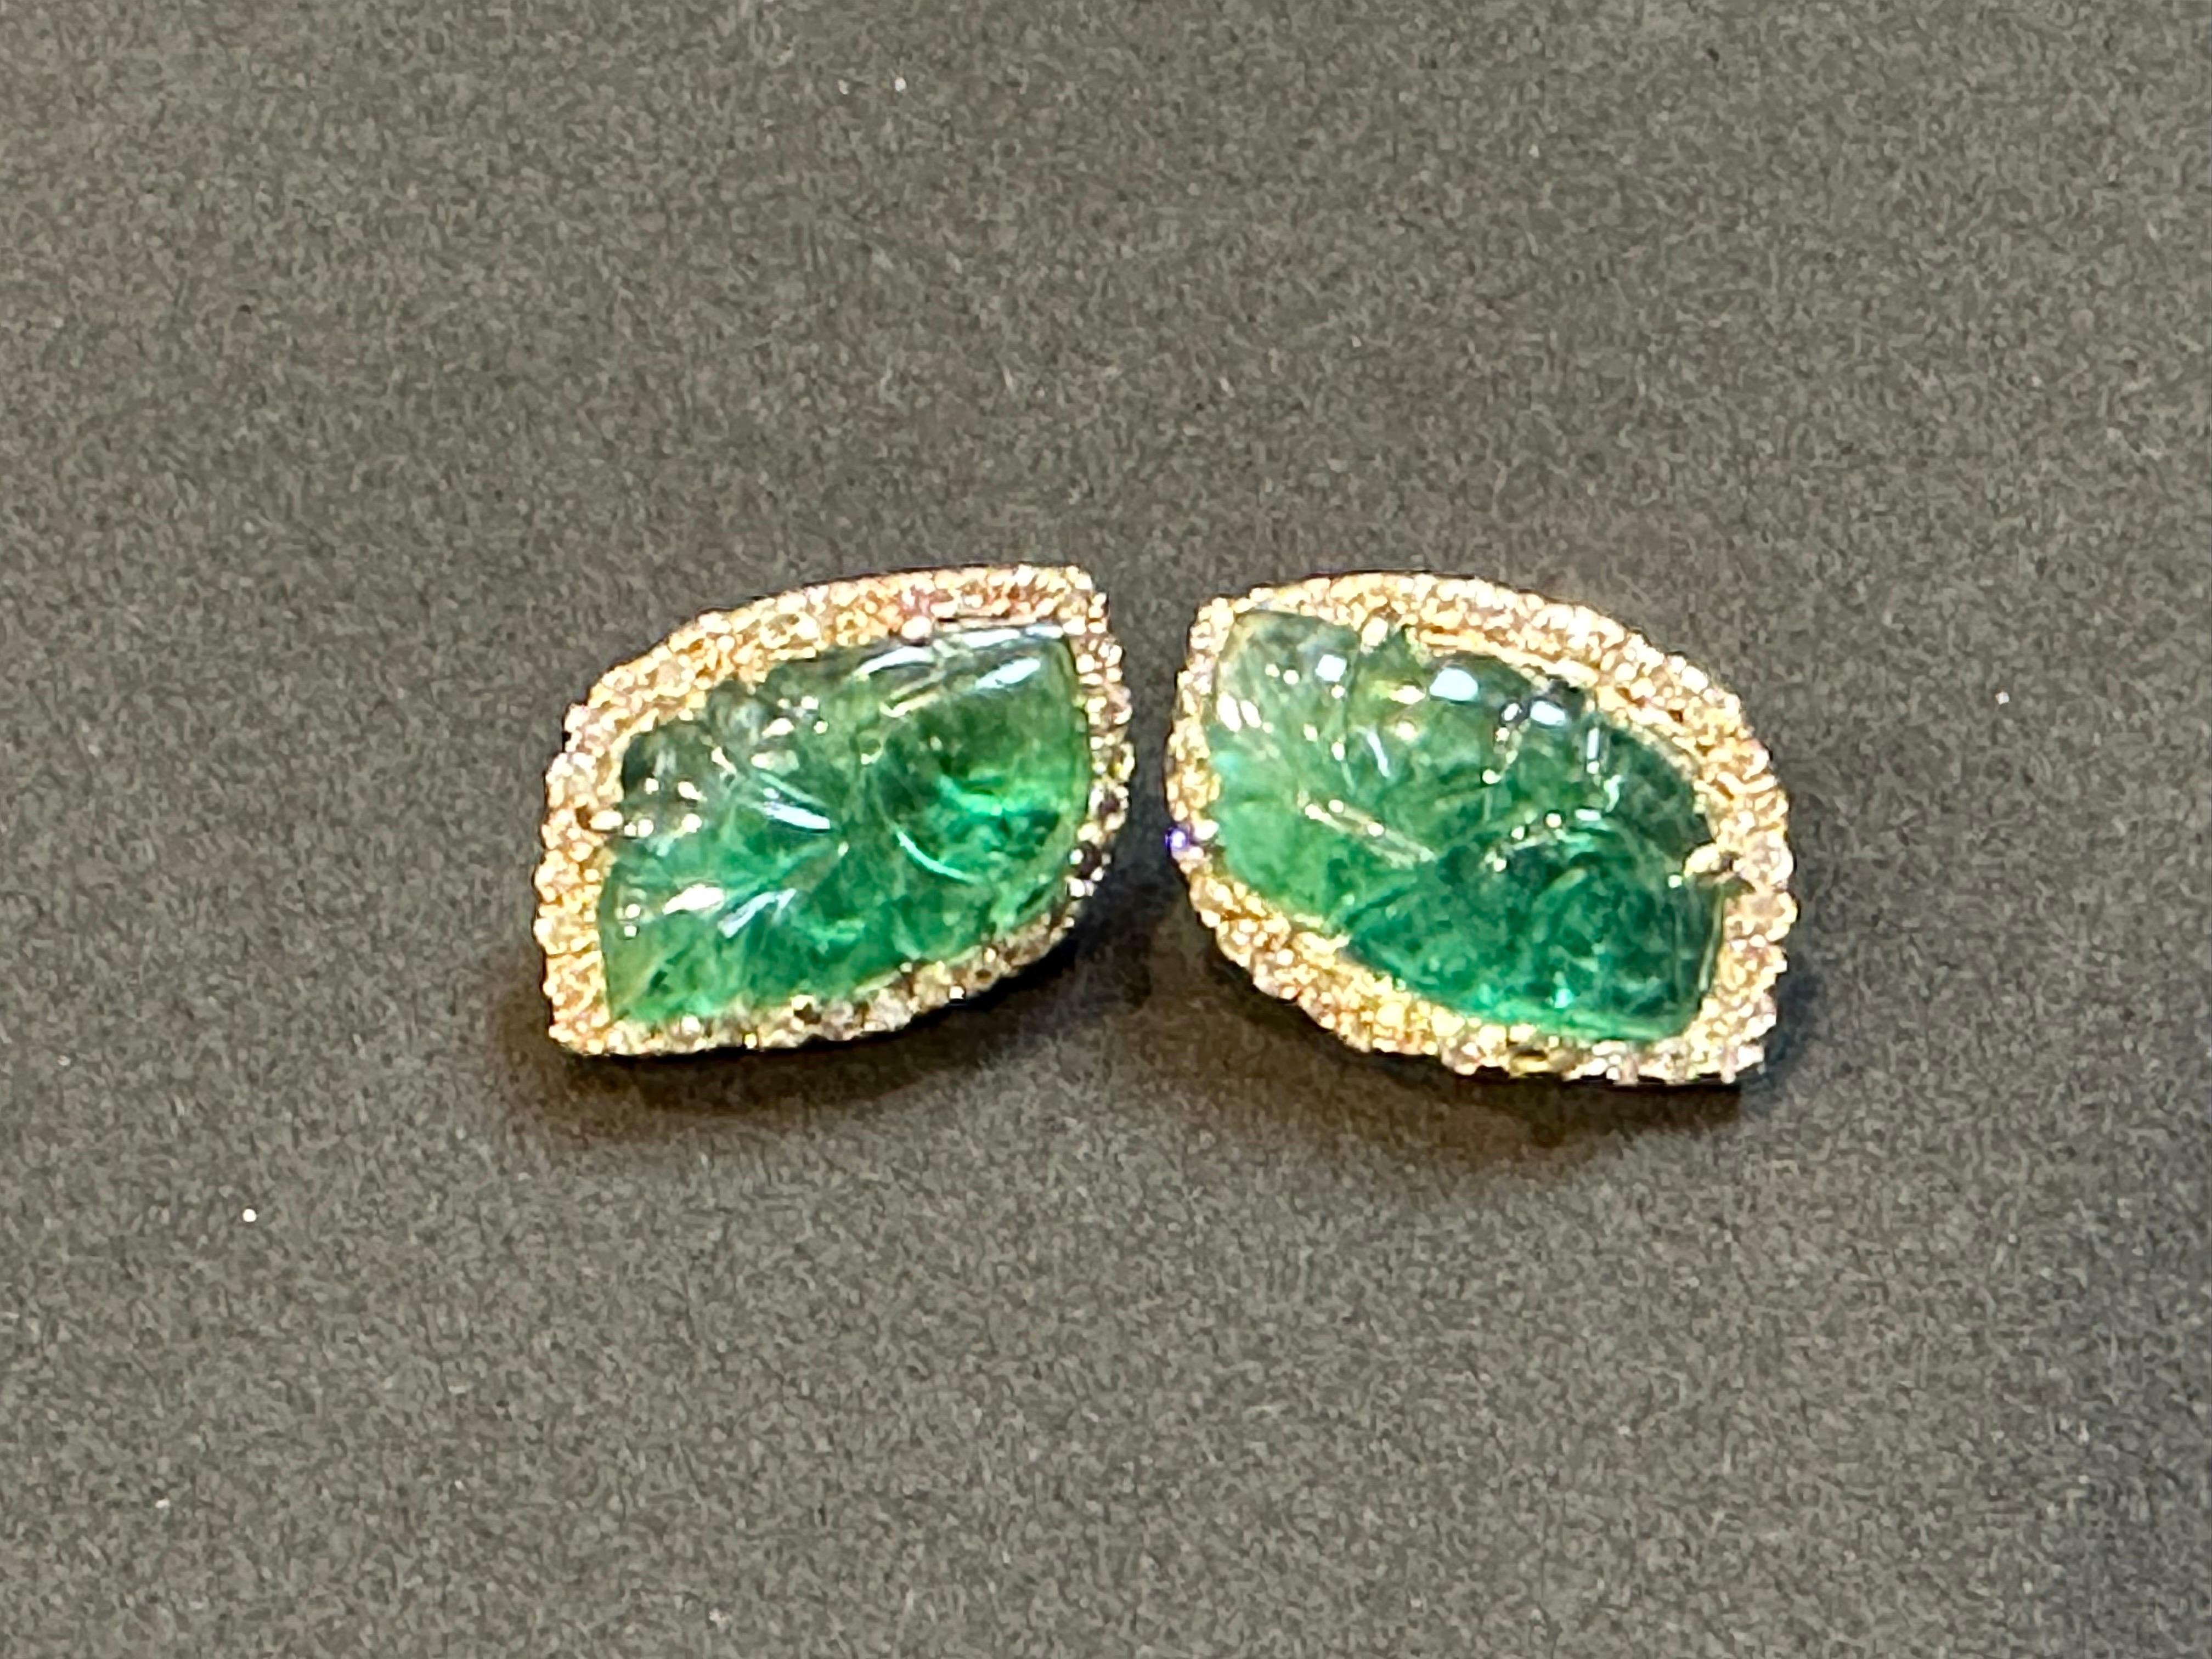 22 Ct Carved Emerald & 2 Ct Diamond Earrings 14 Karat Yellow Gold Post Earrings For Sale 4